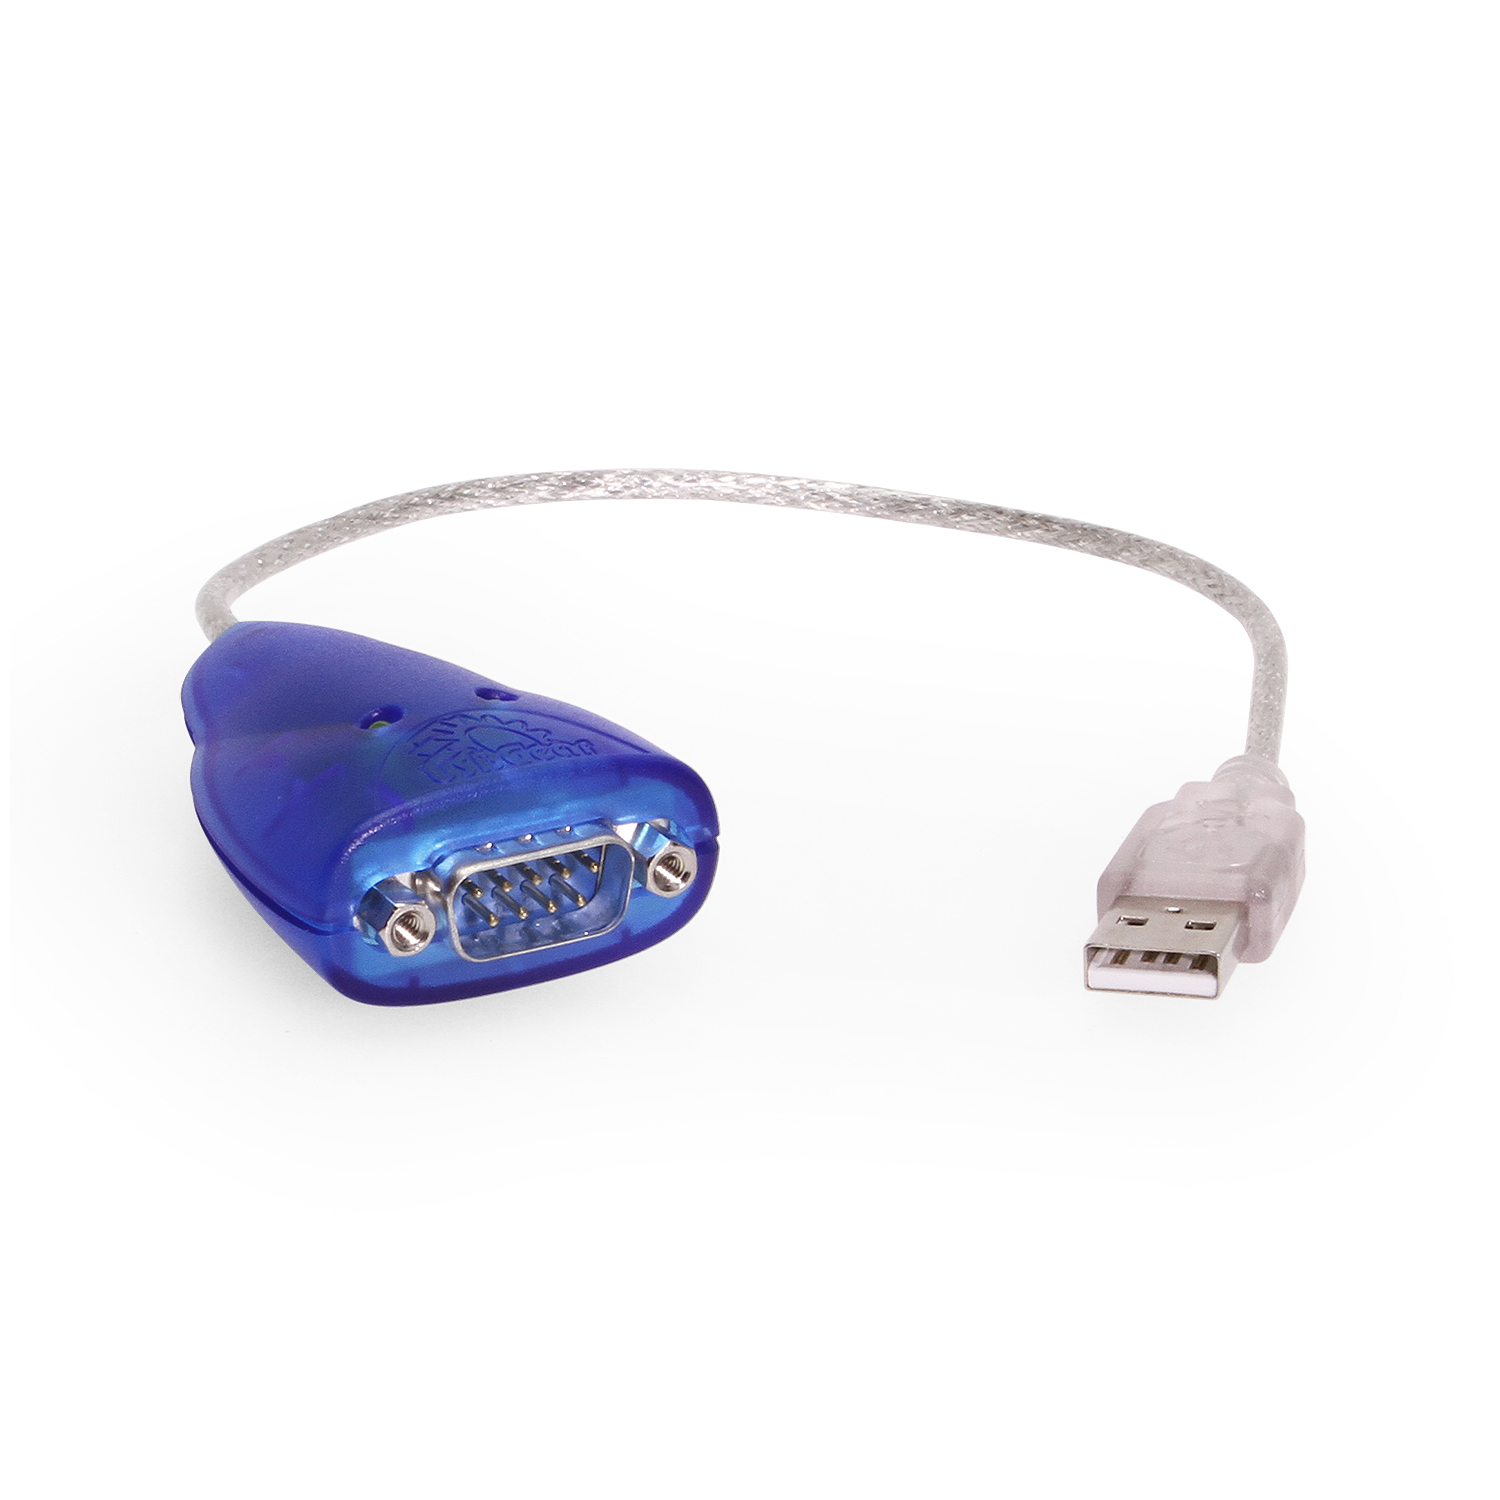 Agencia de viajes huella dactilar foso USB to Serial RS-232 DB9 Adapter FTDI Chipset w/ 15kV ESD Protection,  Windows 11 Support - Coolgear